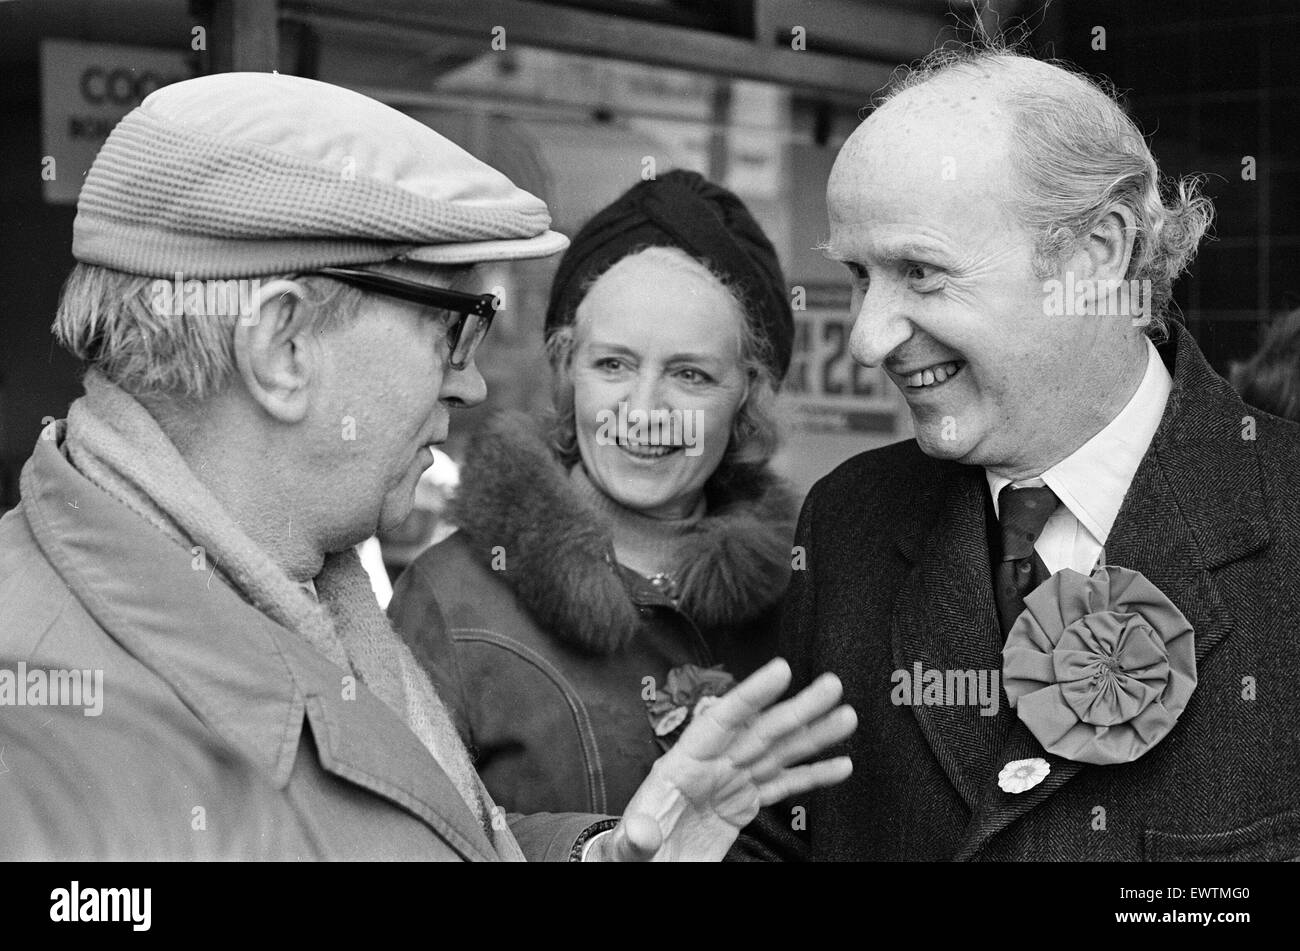 Anthony Barber, Chancellor of the Exchequer and Conservative Member of Parliament for Altrincham and Sale, pictured with wife Jean, campaigning in Altrincham and Sale, Greater Manchester, ahead of 1974 General Election, 23rd February 1974. Stock Photo